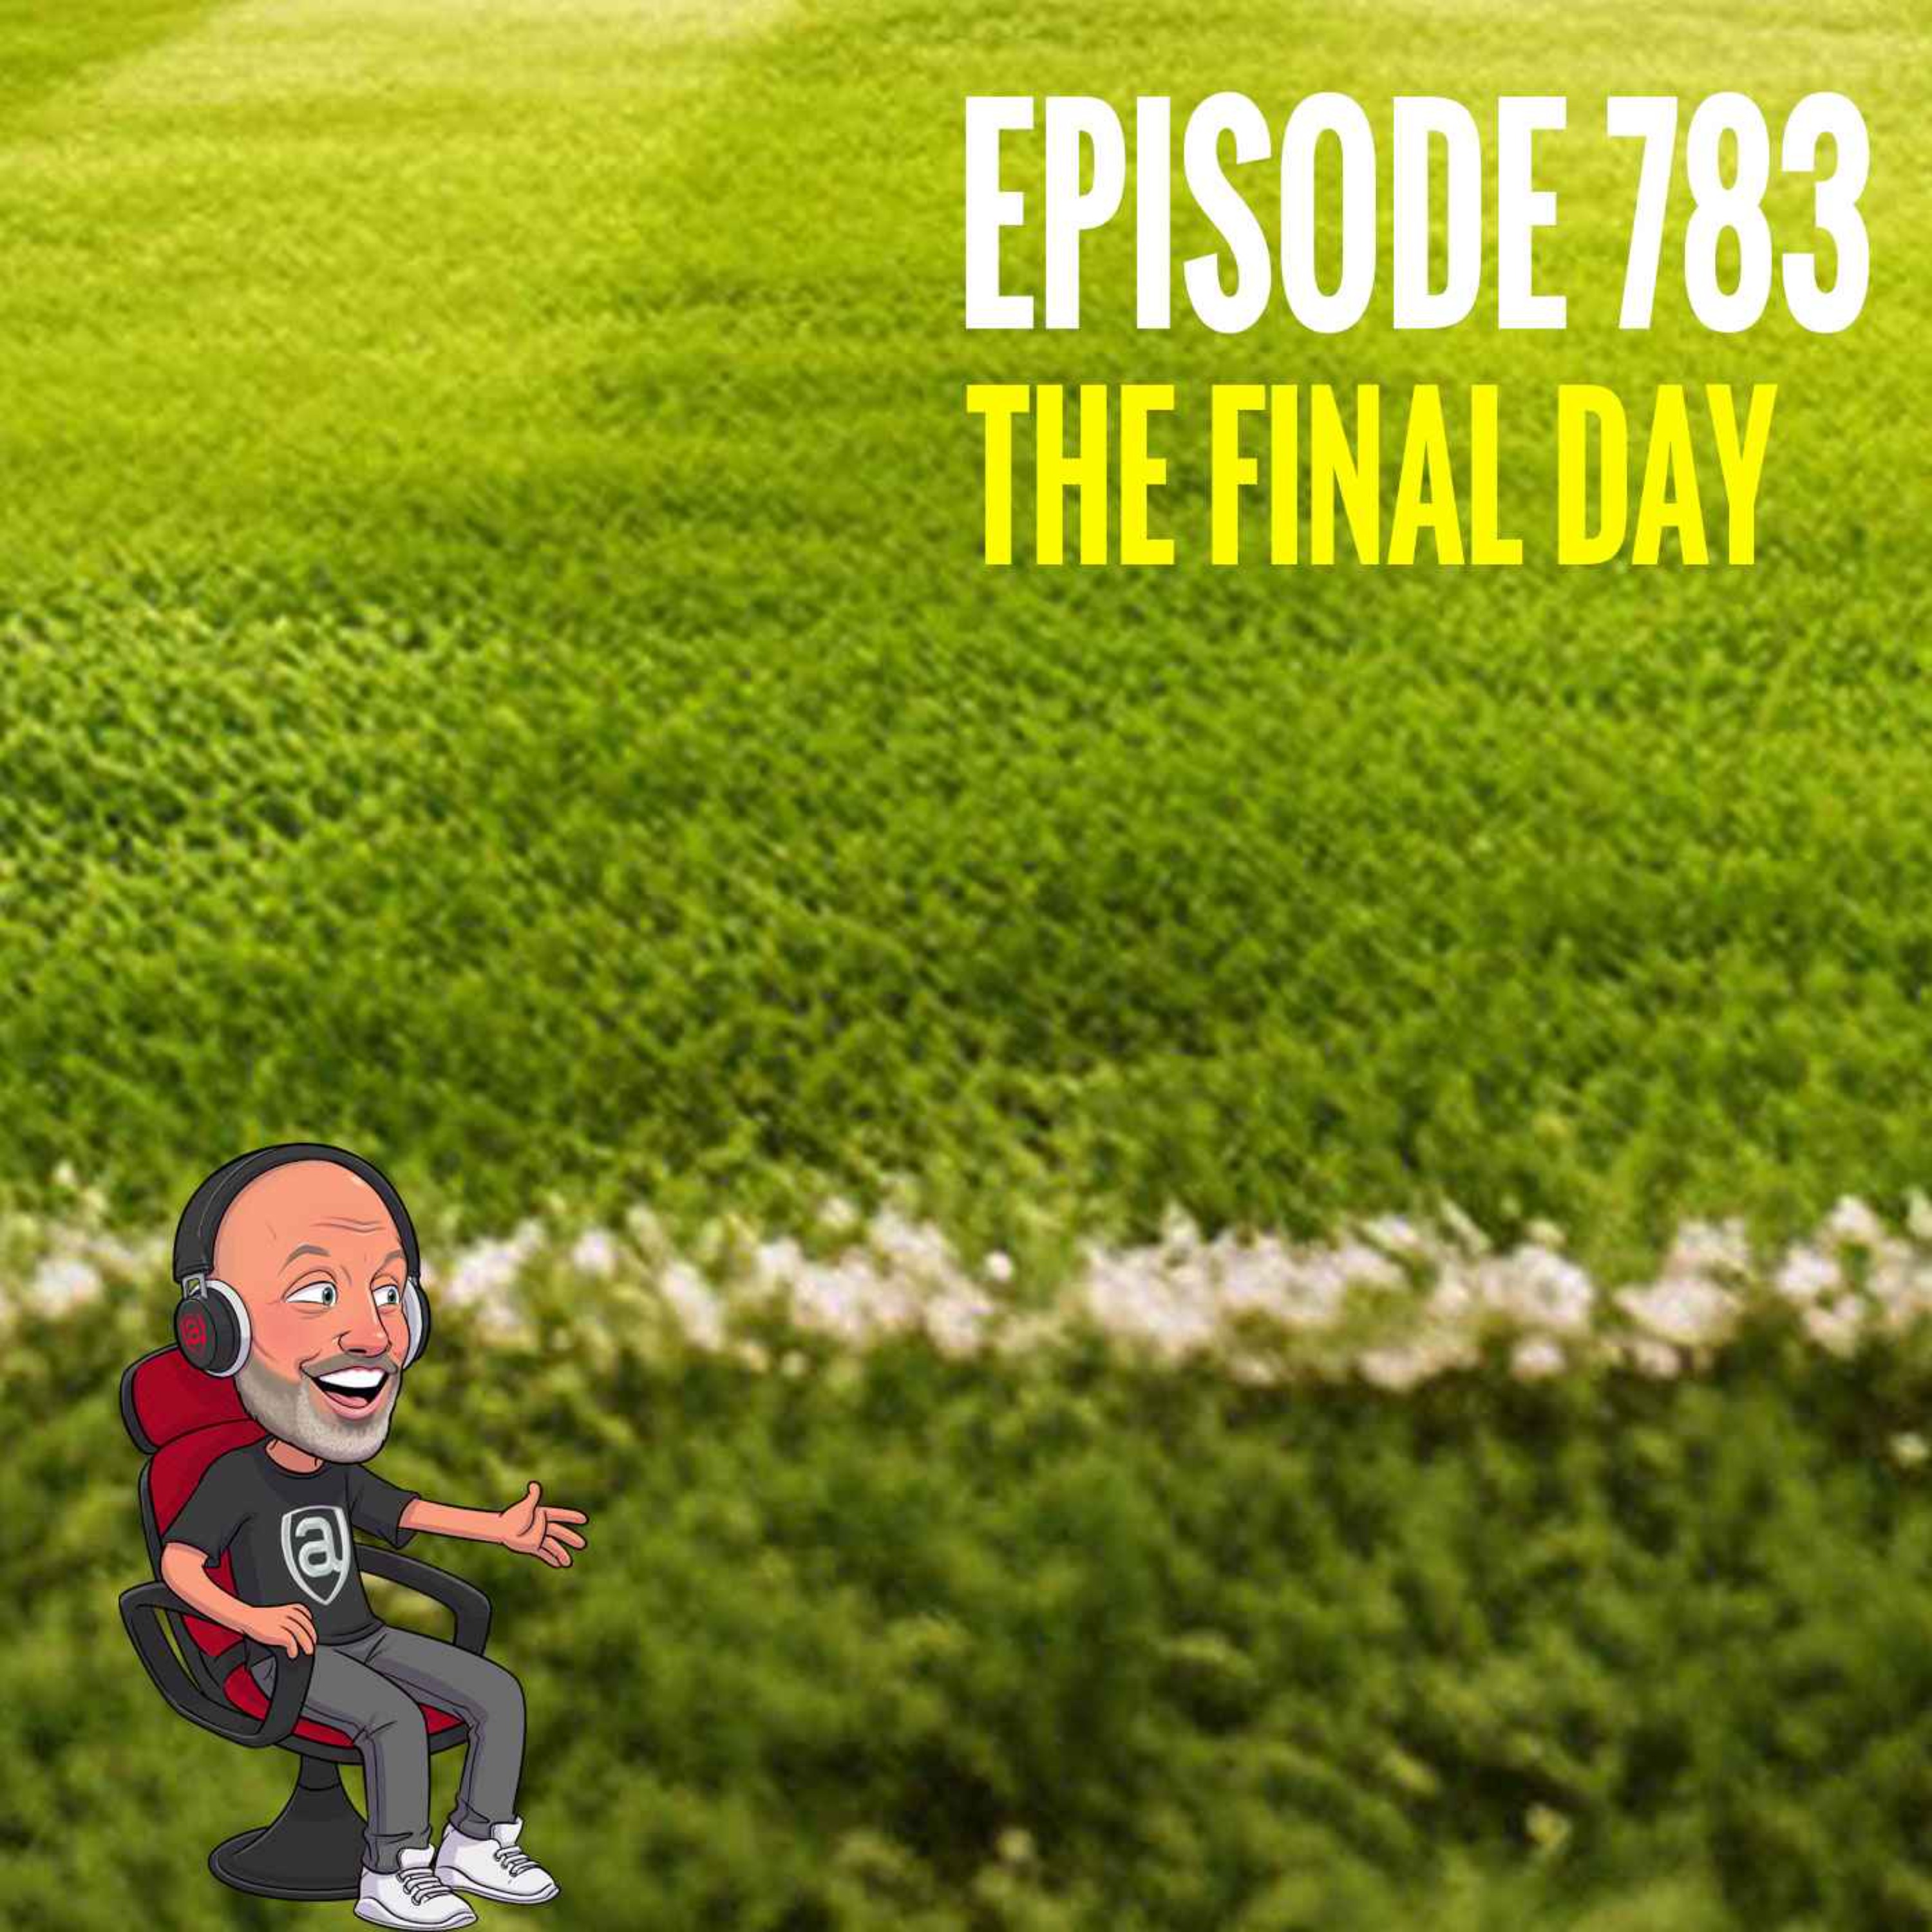 Episode 783 - The Final Day